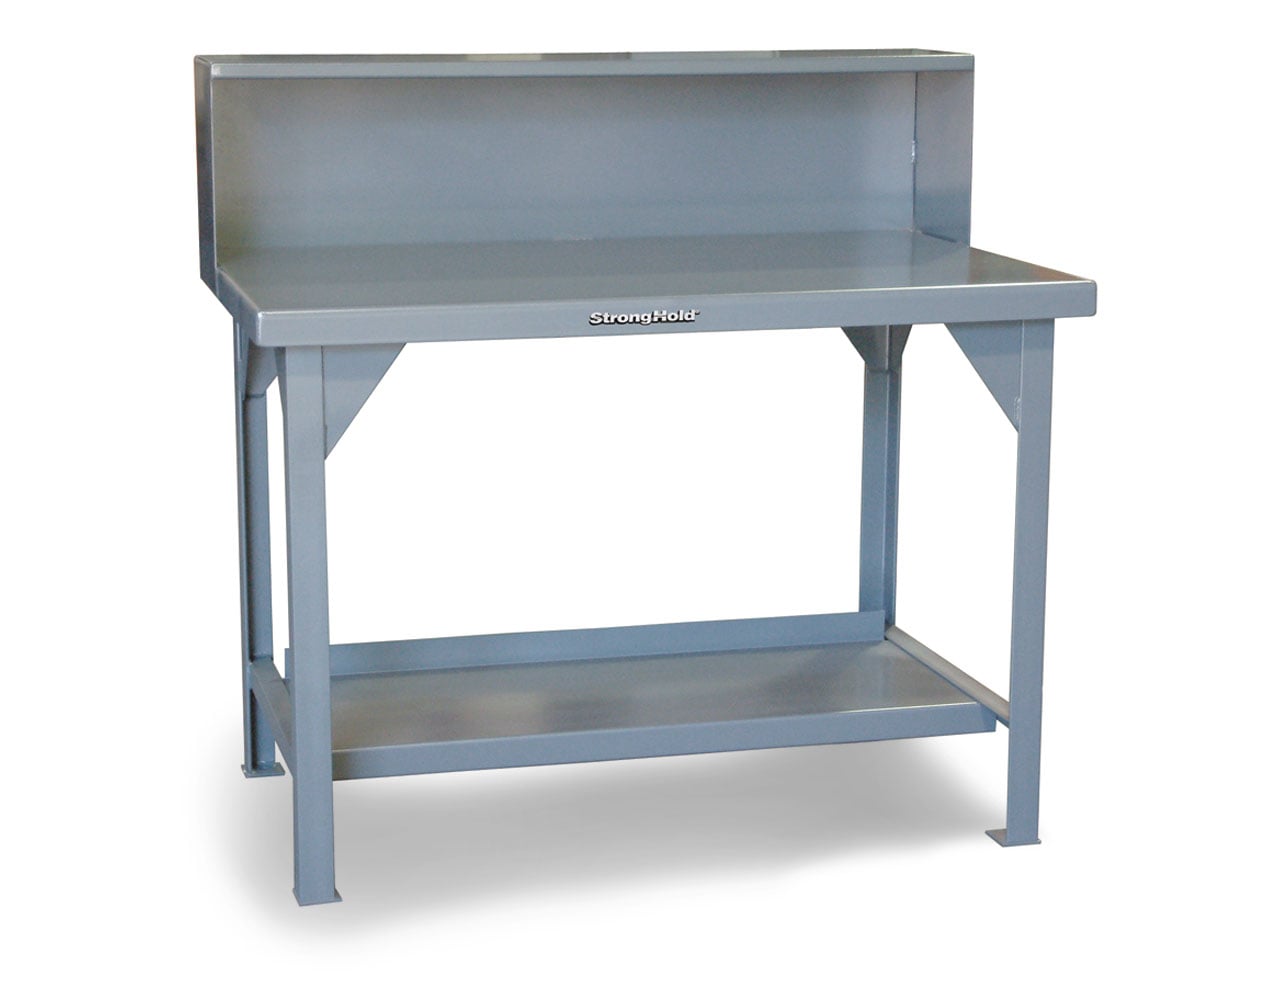 Extreme Duty 7 GA Shop Table with Riser Shelf - 48 In. W x 30 In. D x 46 In. H